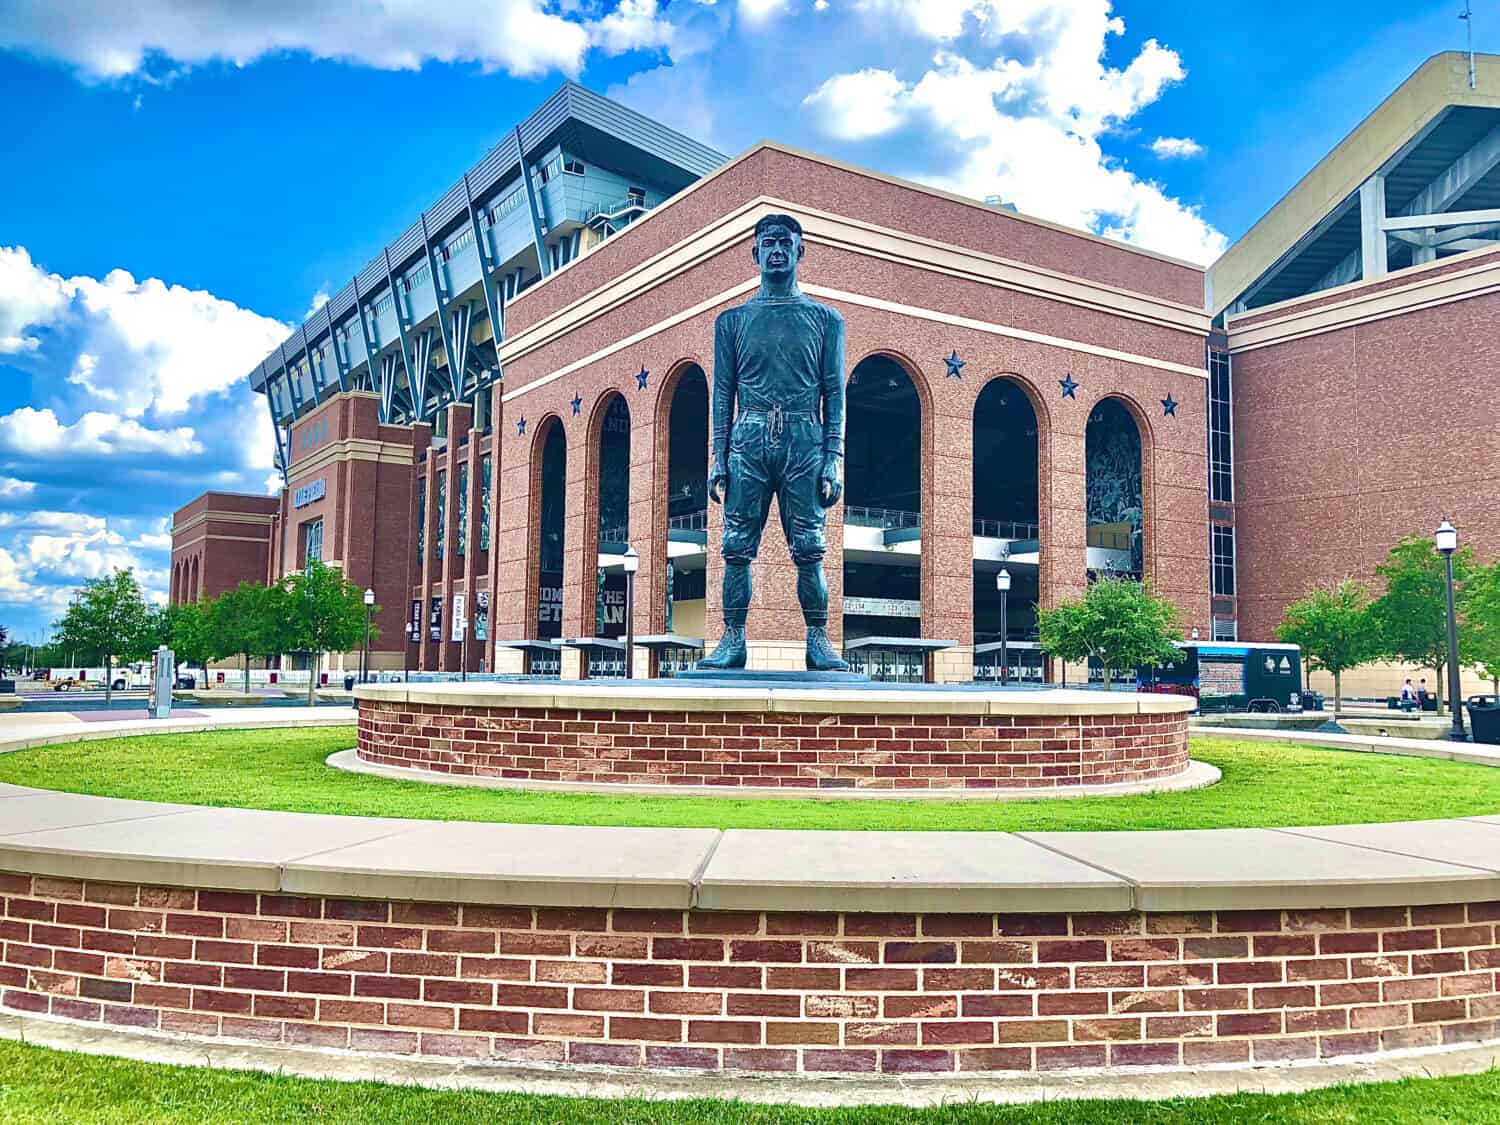 The 12th man statue at Kyle Field, Texas AM University, College Station, Texas